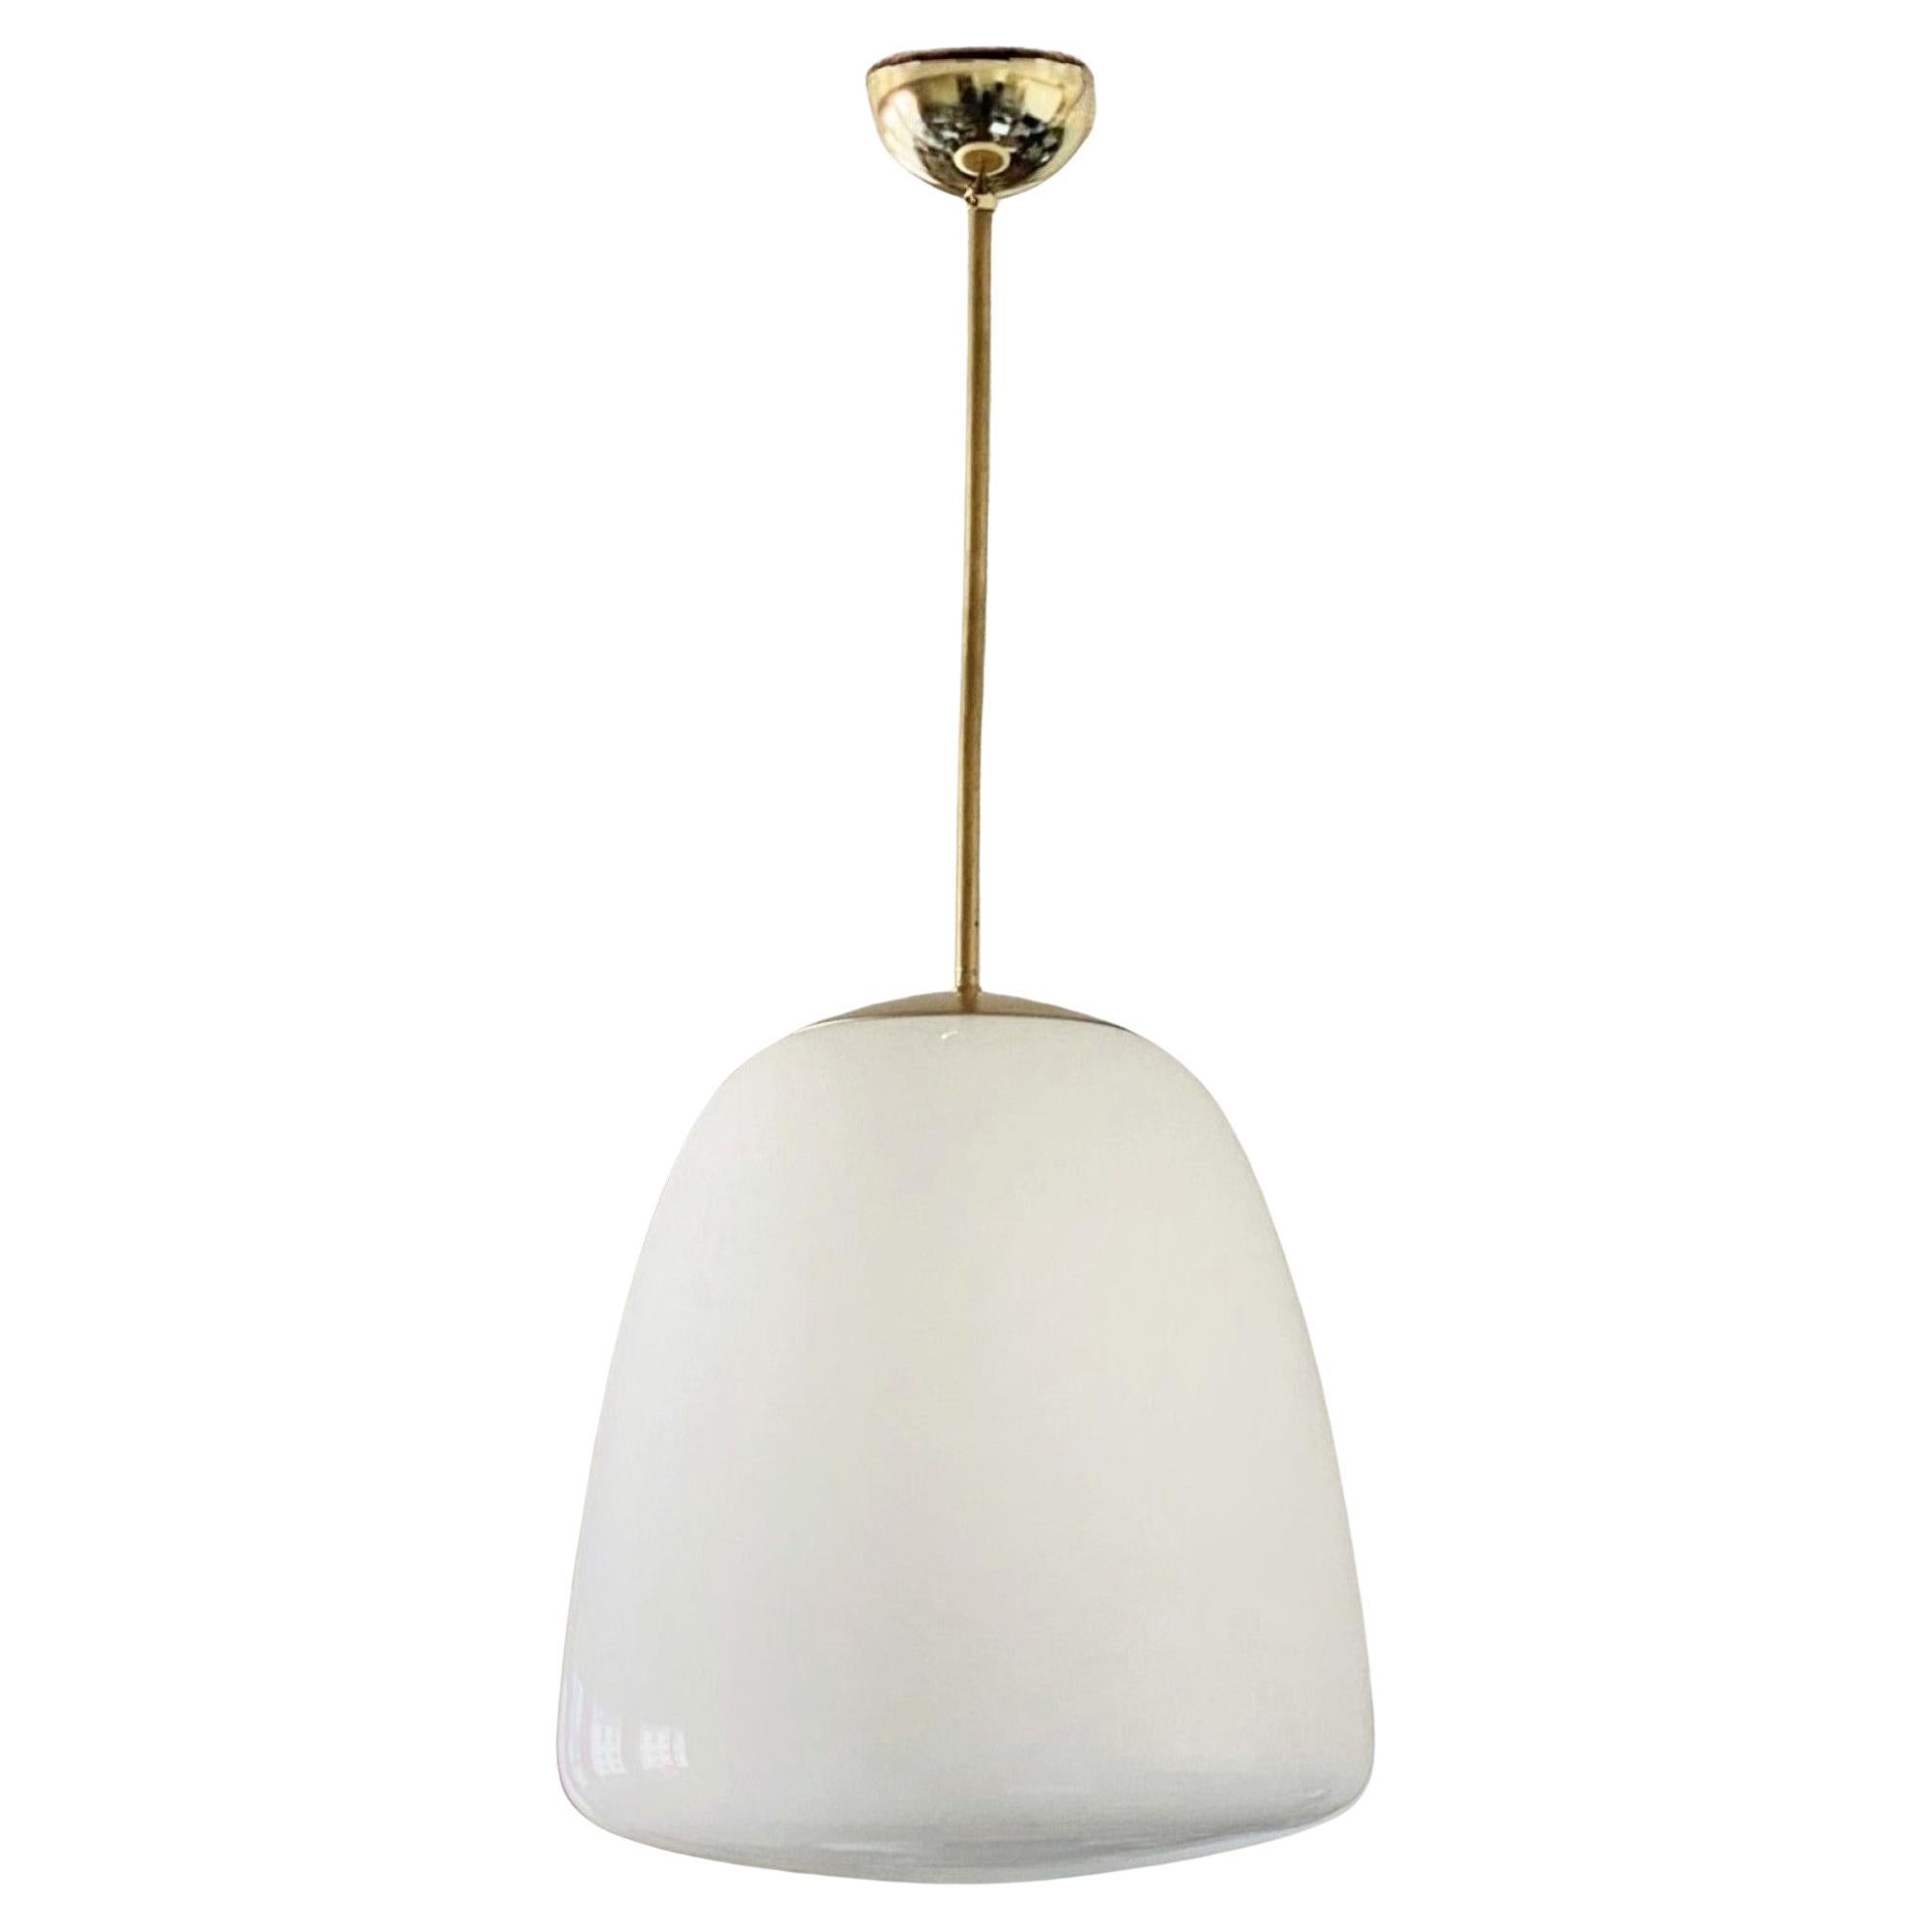 A pair of Bauhaus opaline glass Theatre pendants, Germany, 1930-1939. Large conical shaped thick opaline glass shade brass mounted, with porcelain buld holders. Both pieces In very good condition, glass shades without damages, brass with aged